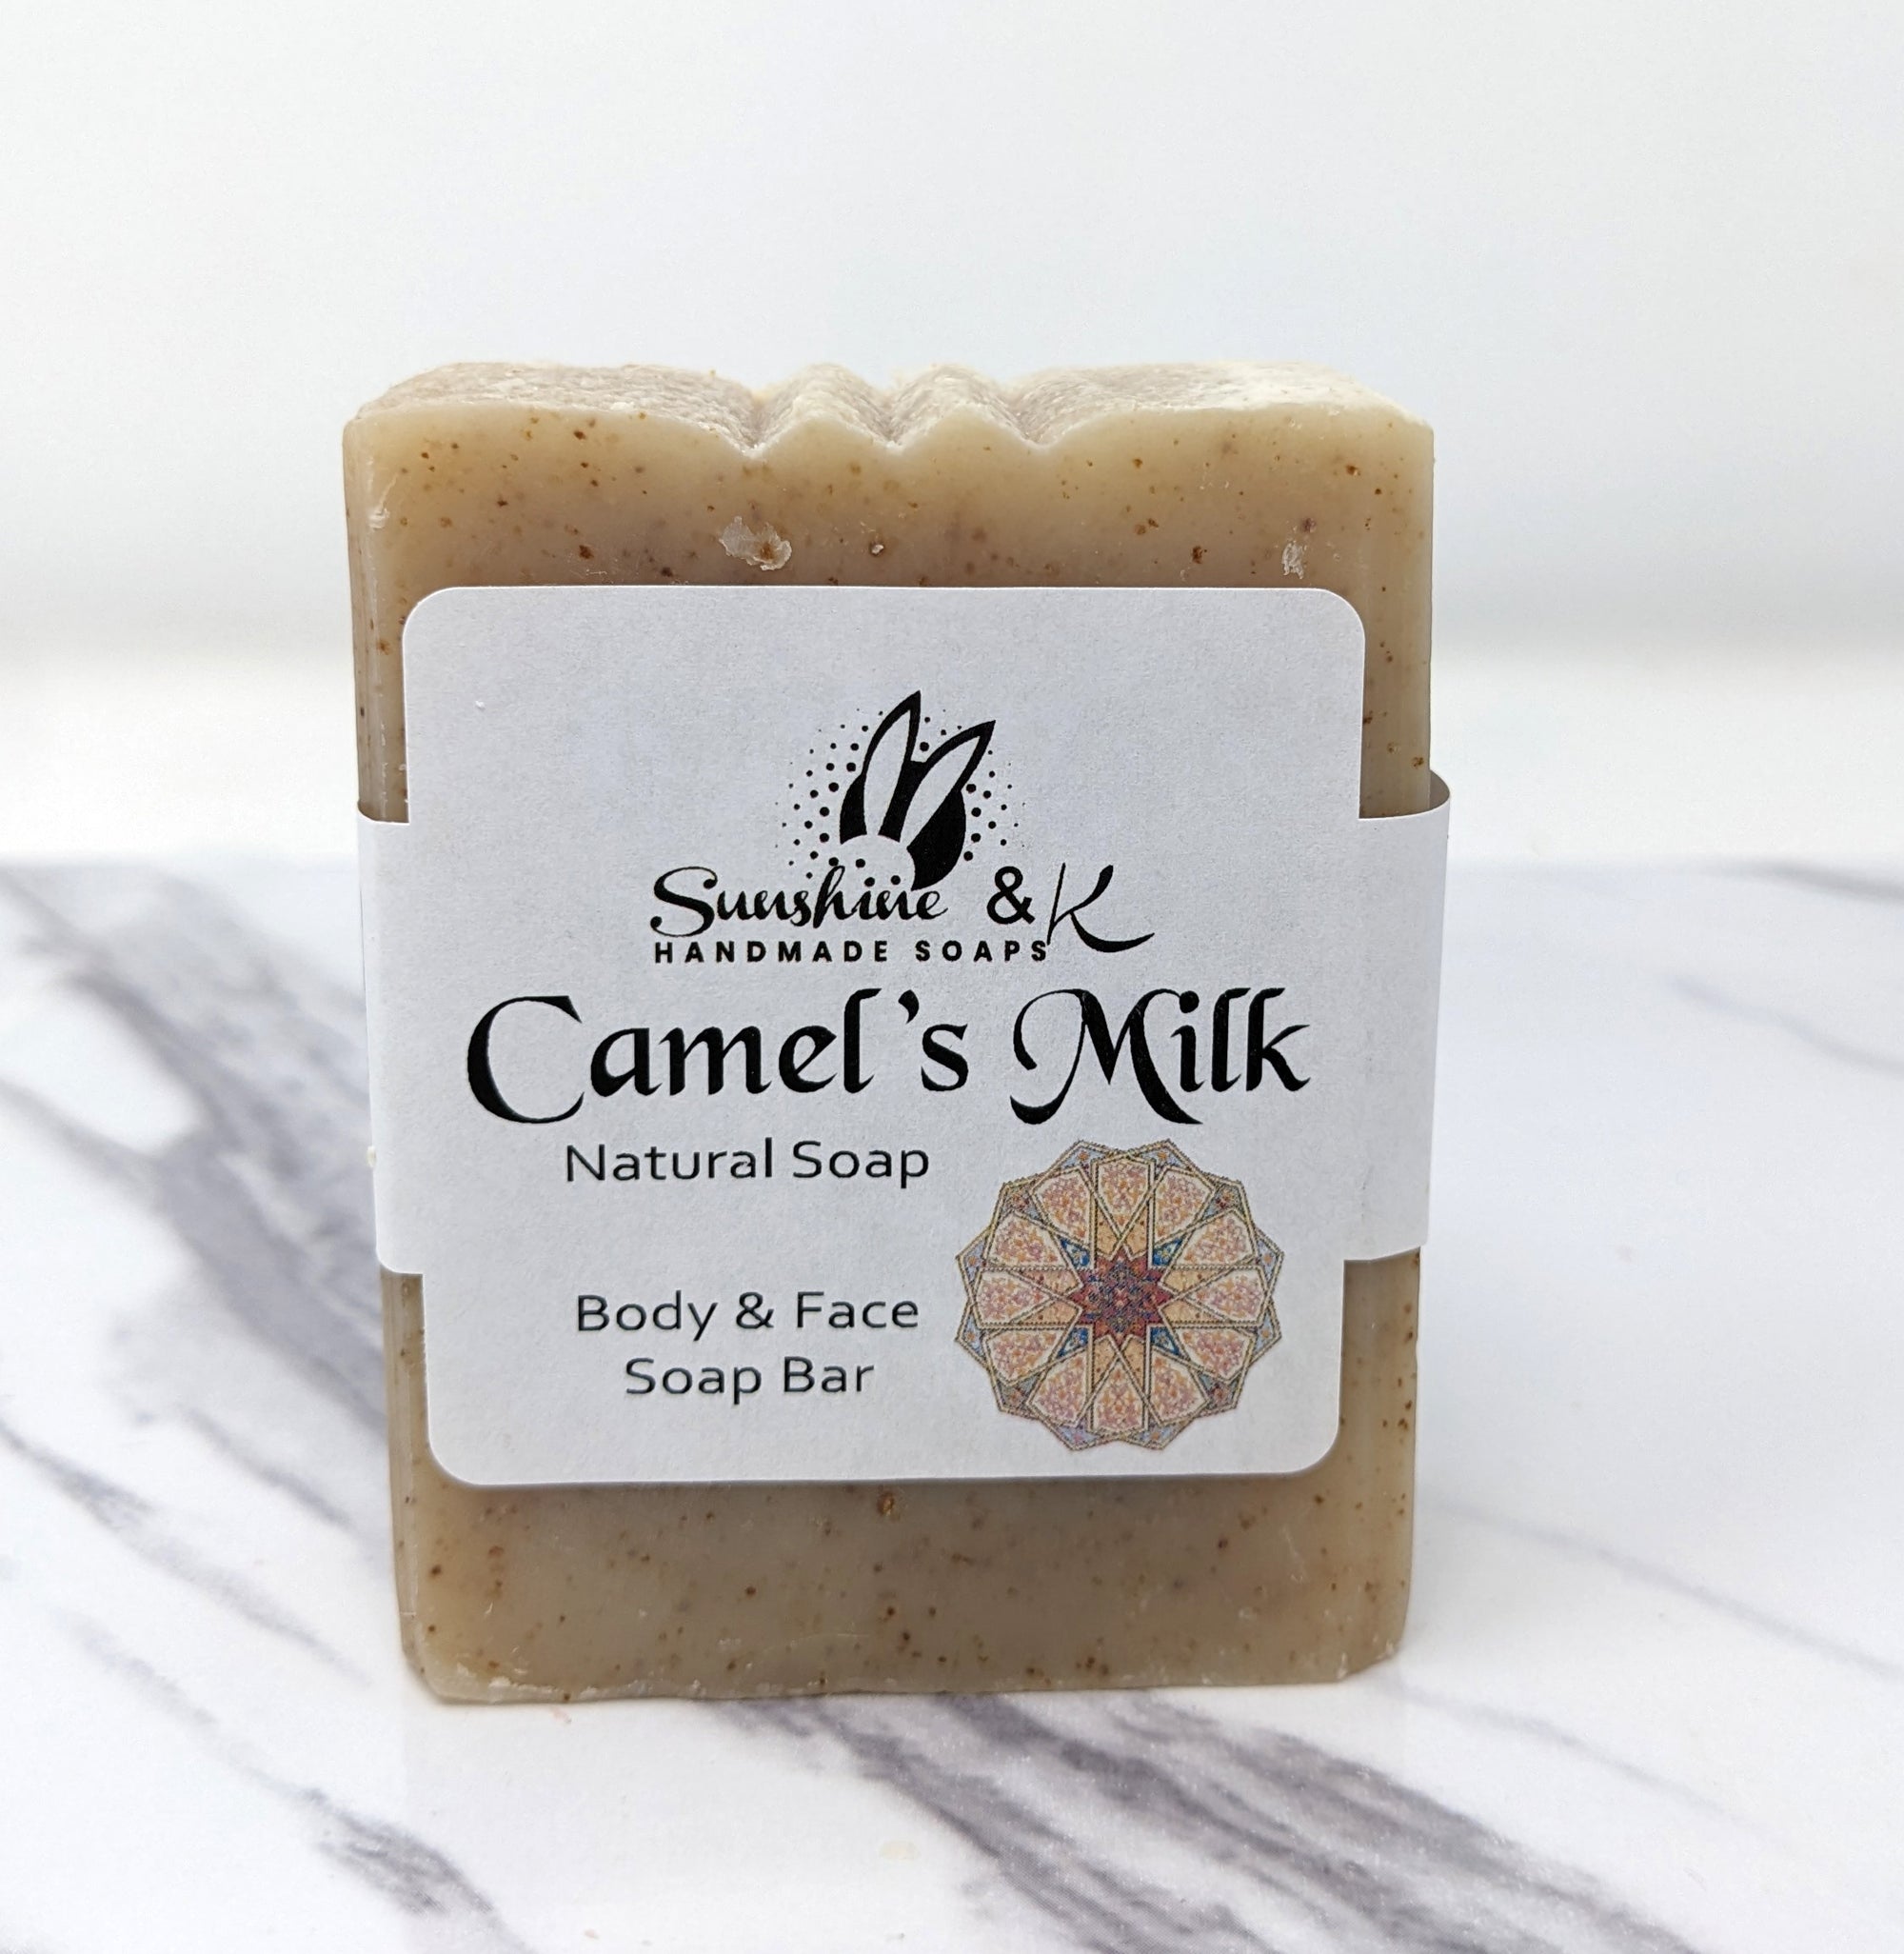 Unscented Camel's Milk Soap Bar – Natural Handmade Unscented Soap Bar - Creamy & Lathery